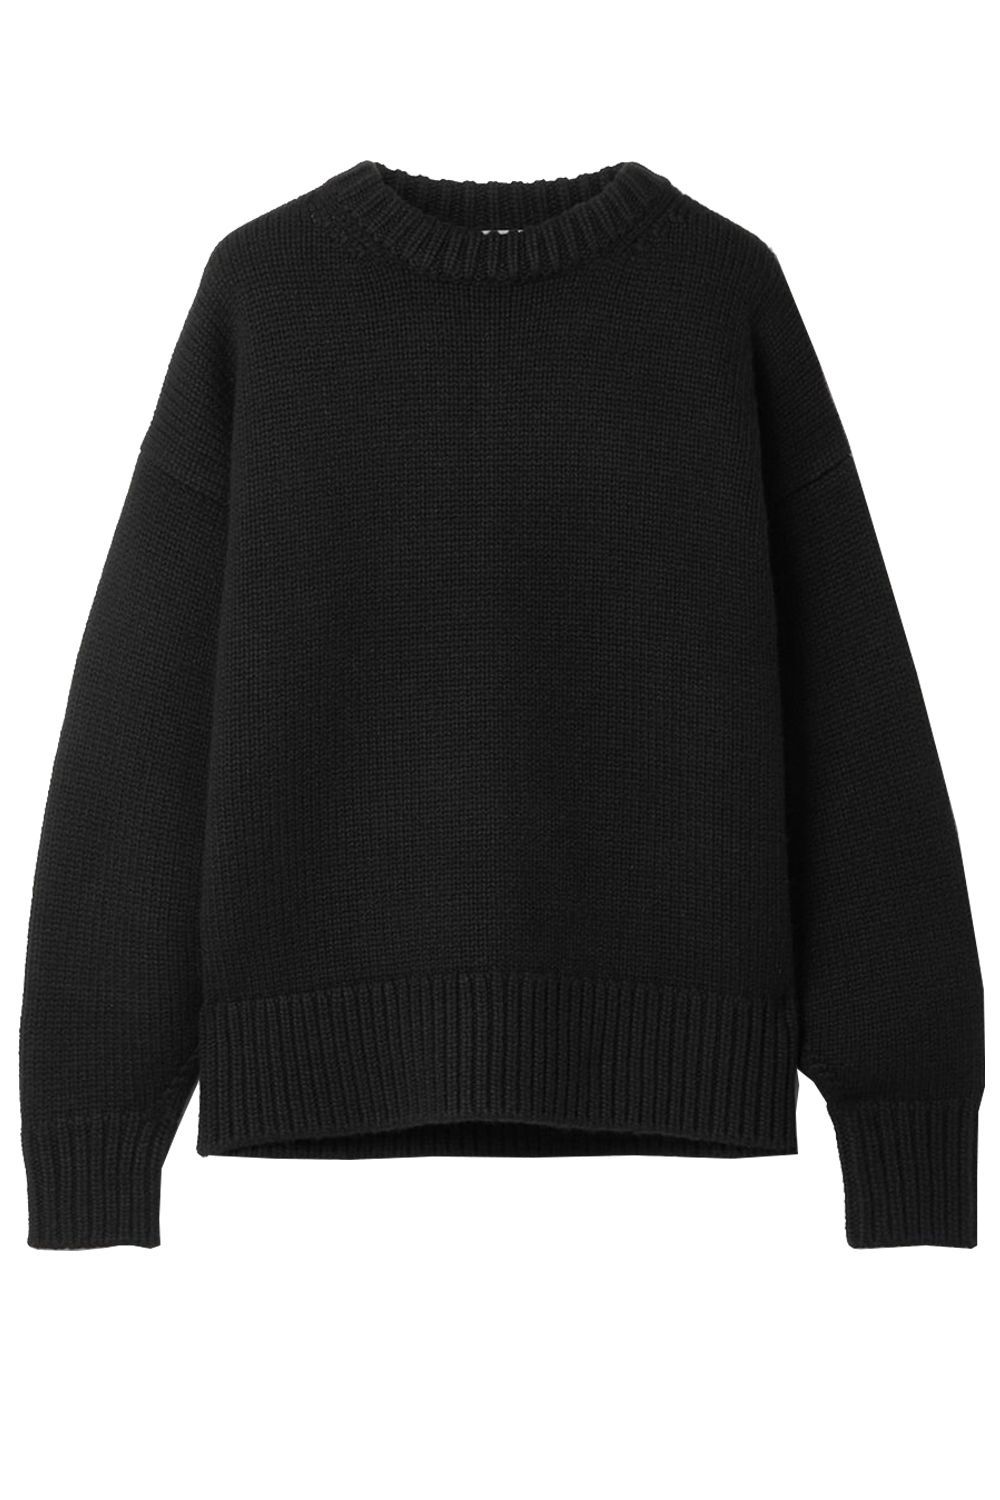 Ophelia Wool and Cashmere-Blend Sweater